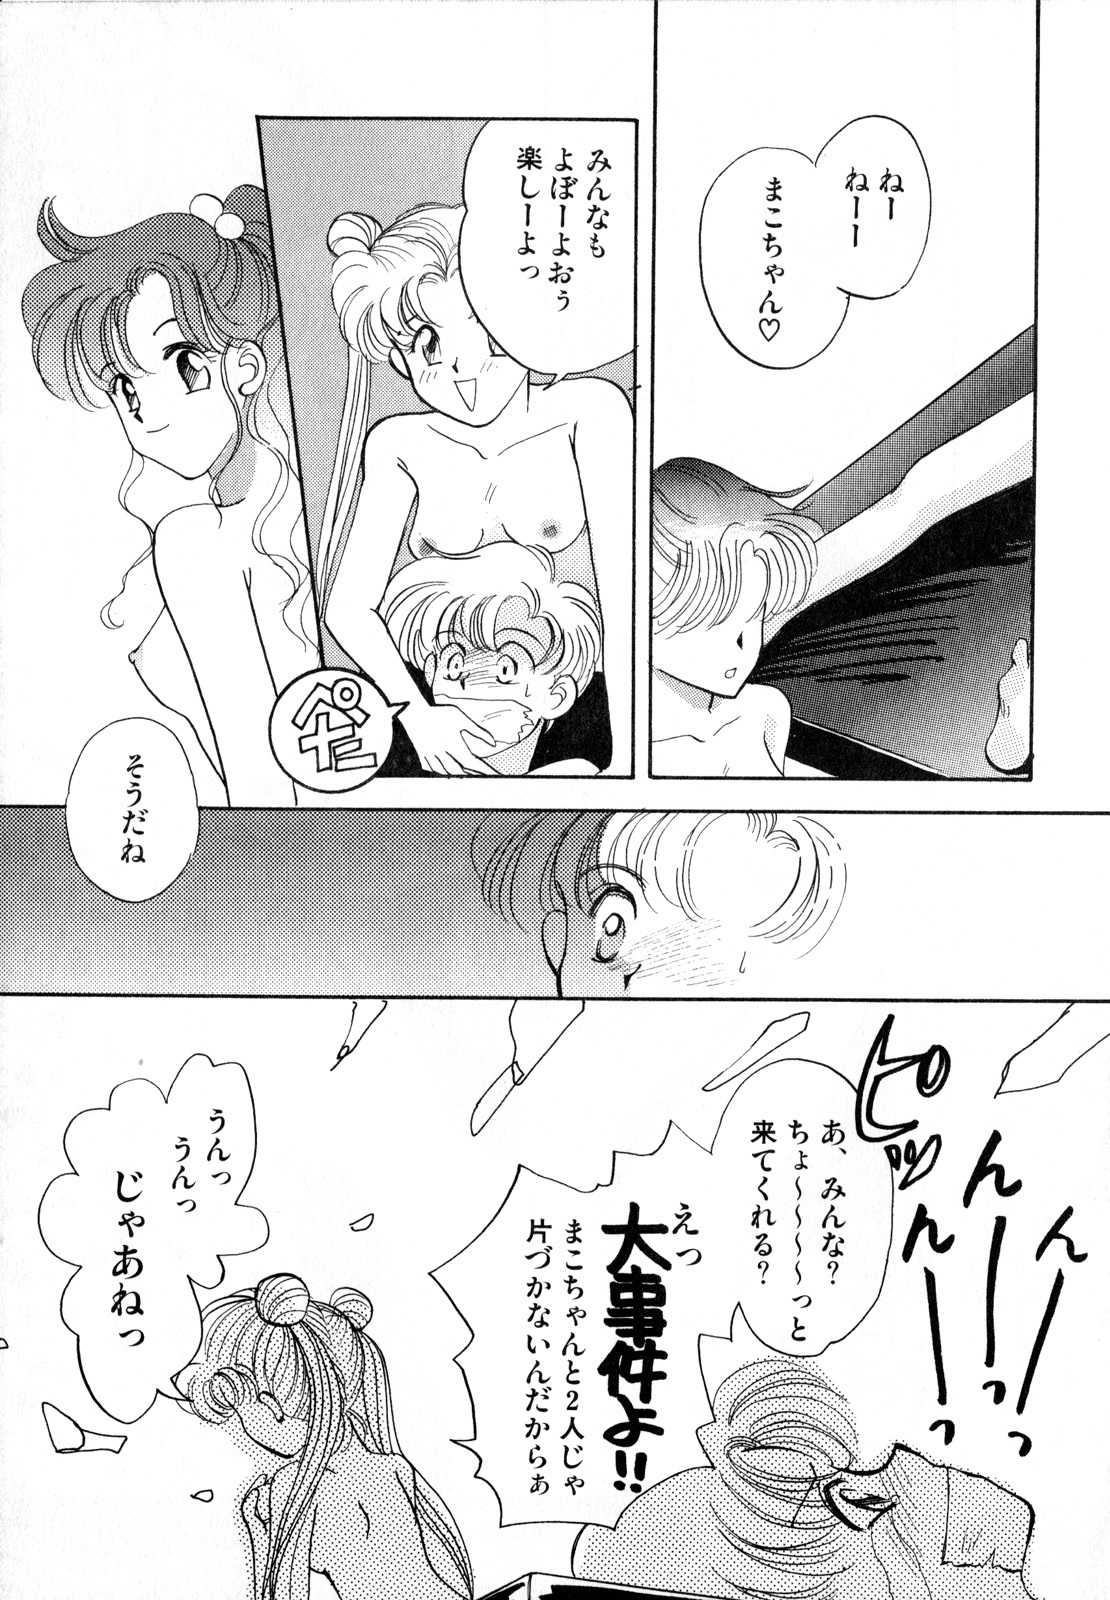 [Anthology] Lunatic Party 2 (Sailor Moon) page 20 full